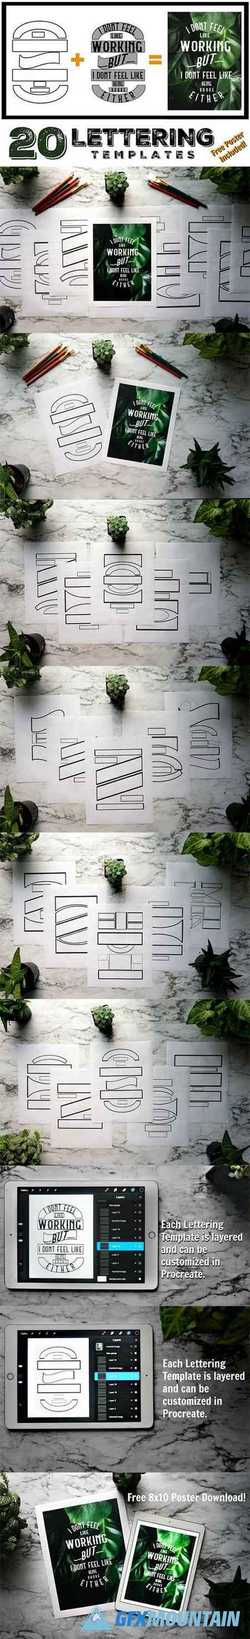 Lettering Composition Templates 2554333